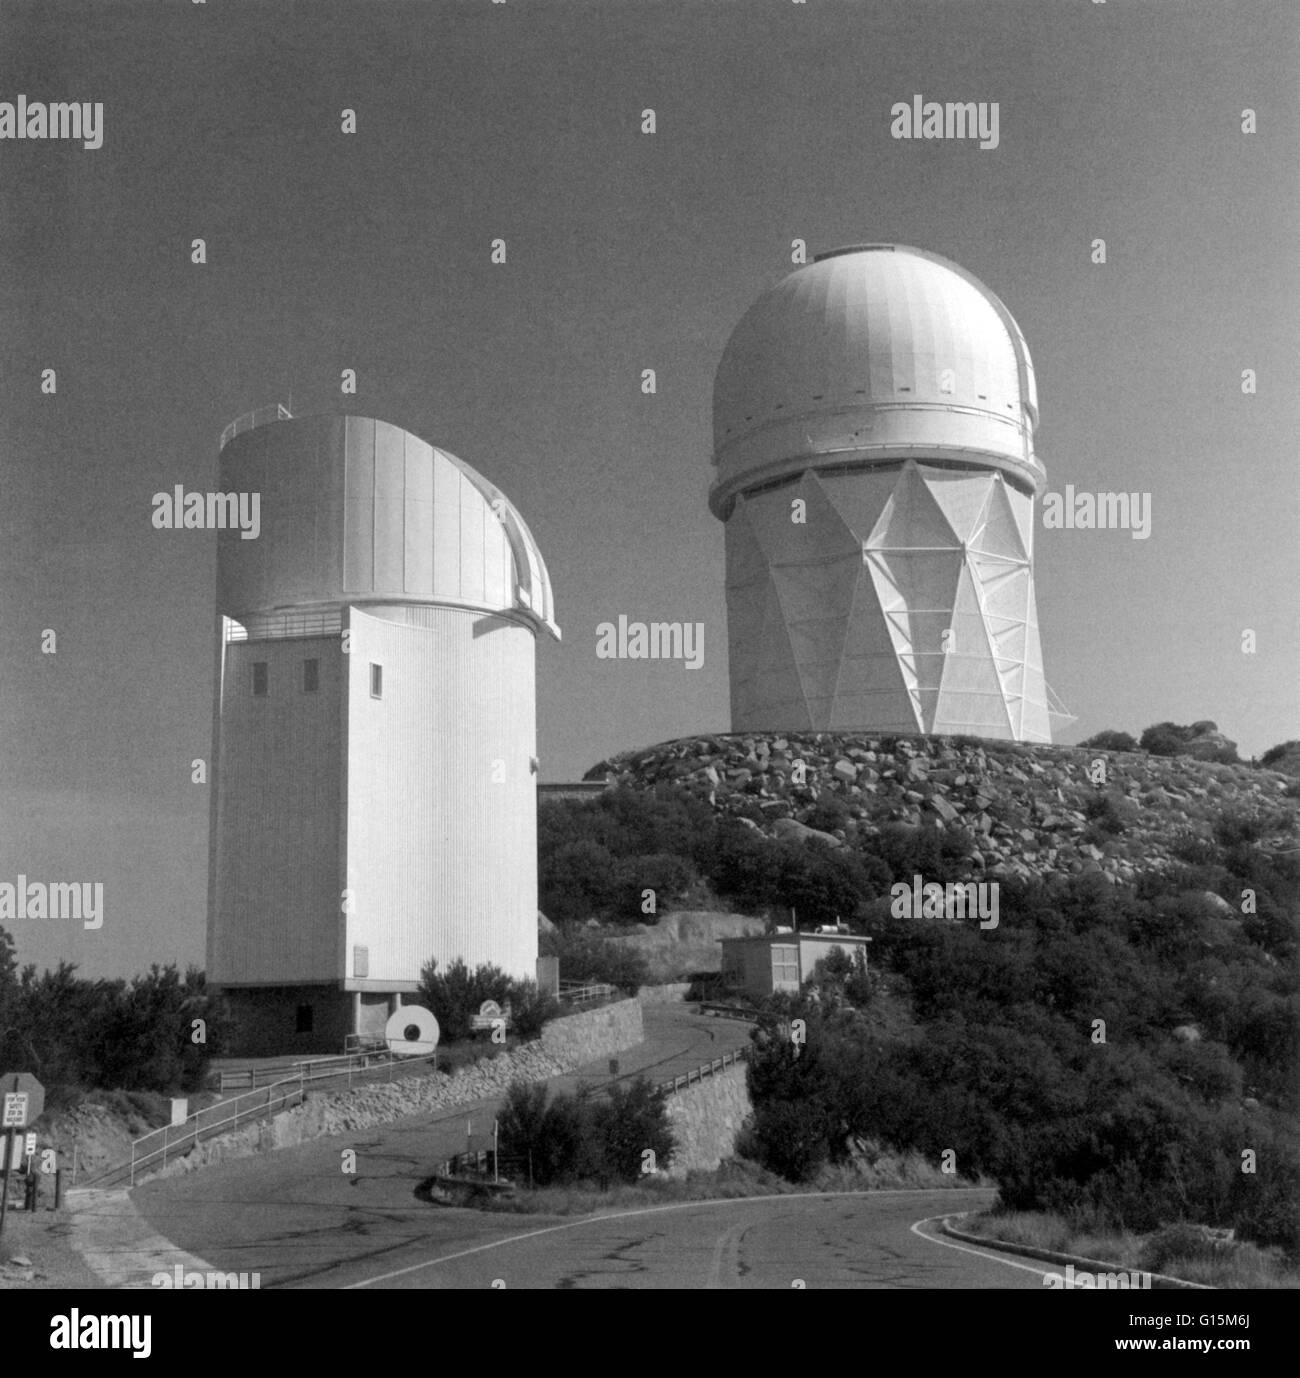 The Kitt Peak National Observatory (KPNO) in 1960. Kitt Peak is part of the Quinlan Mountains in the Arizona-Sonoran Desert southwest of Tucson. Shown here are the Mayall 4-m telescope (right) and the Bok 2.3-m (90 in) telescope (left). Stock Photo